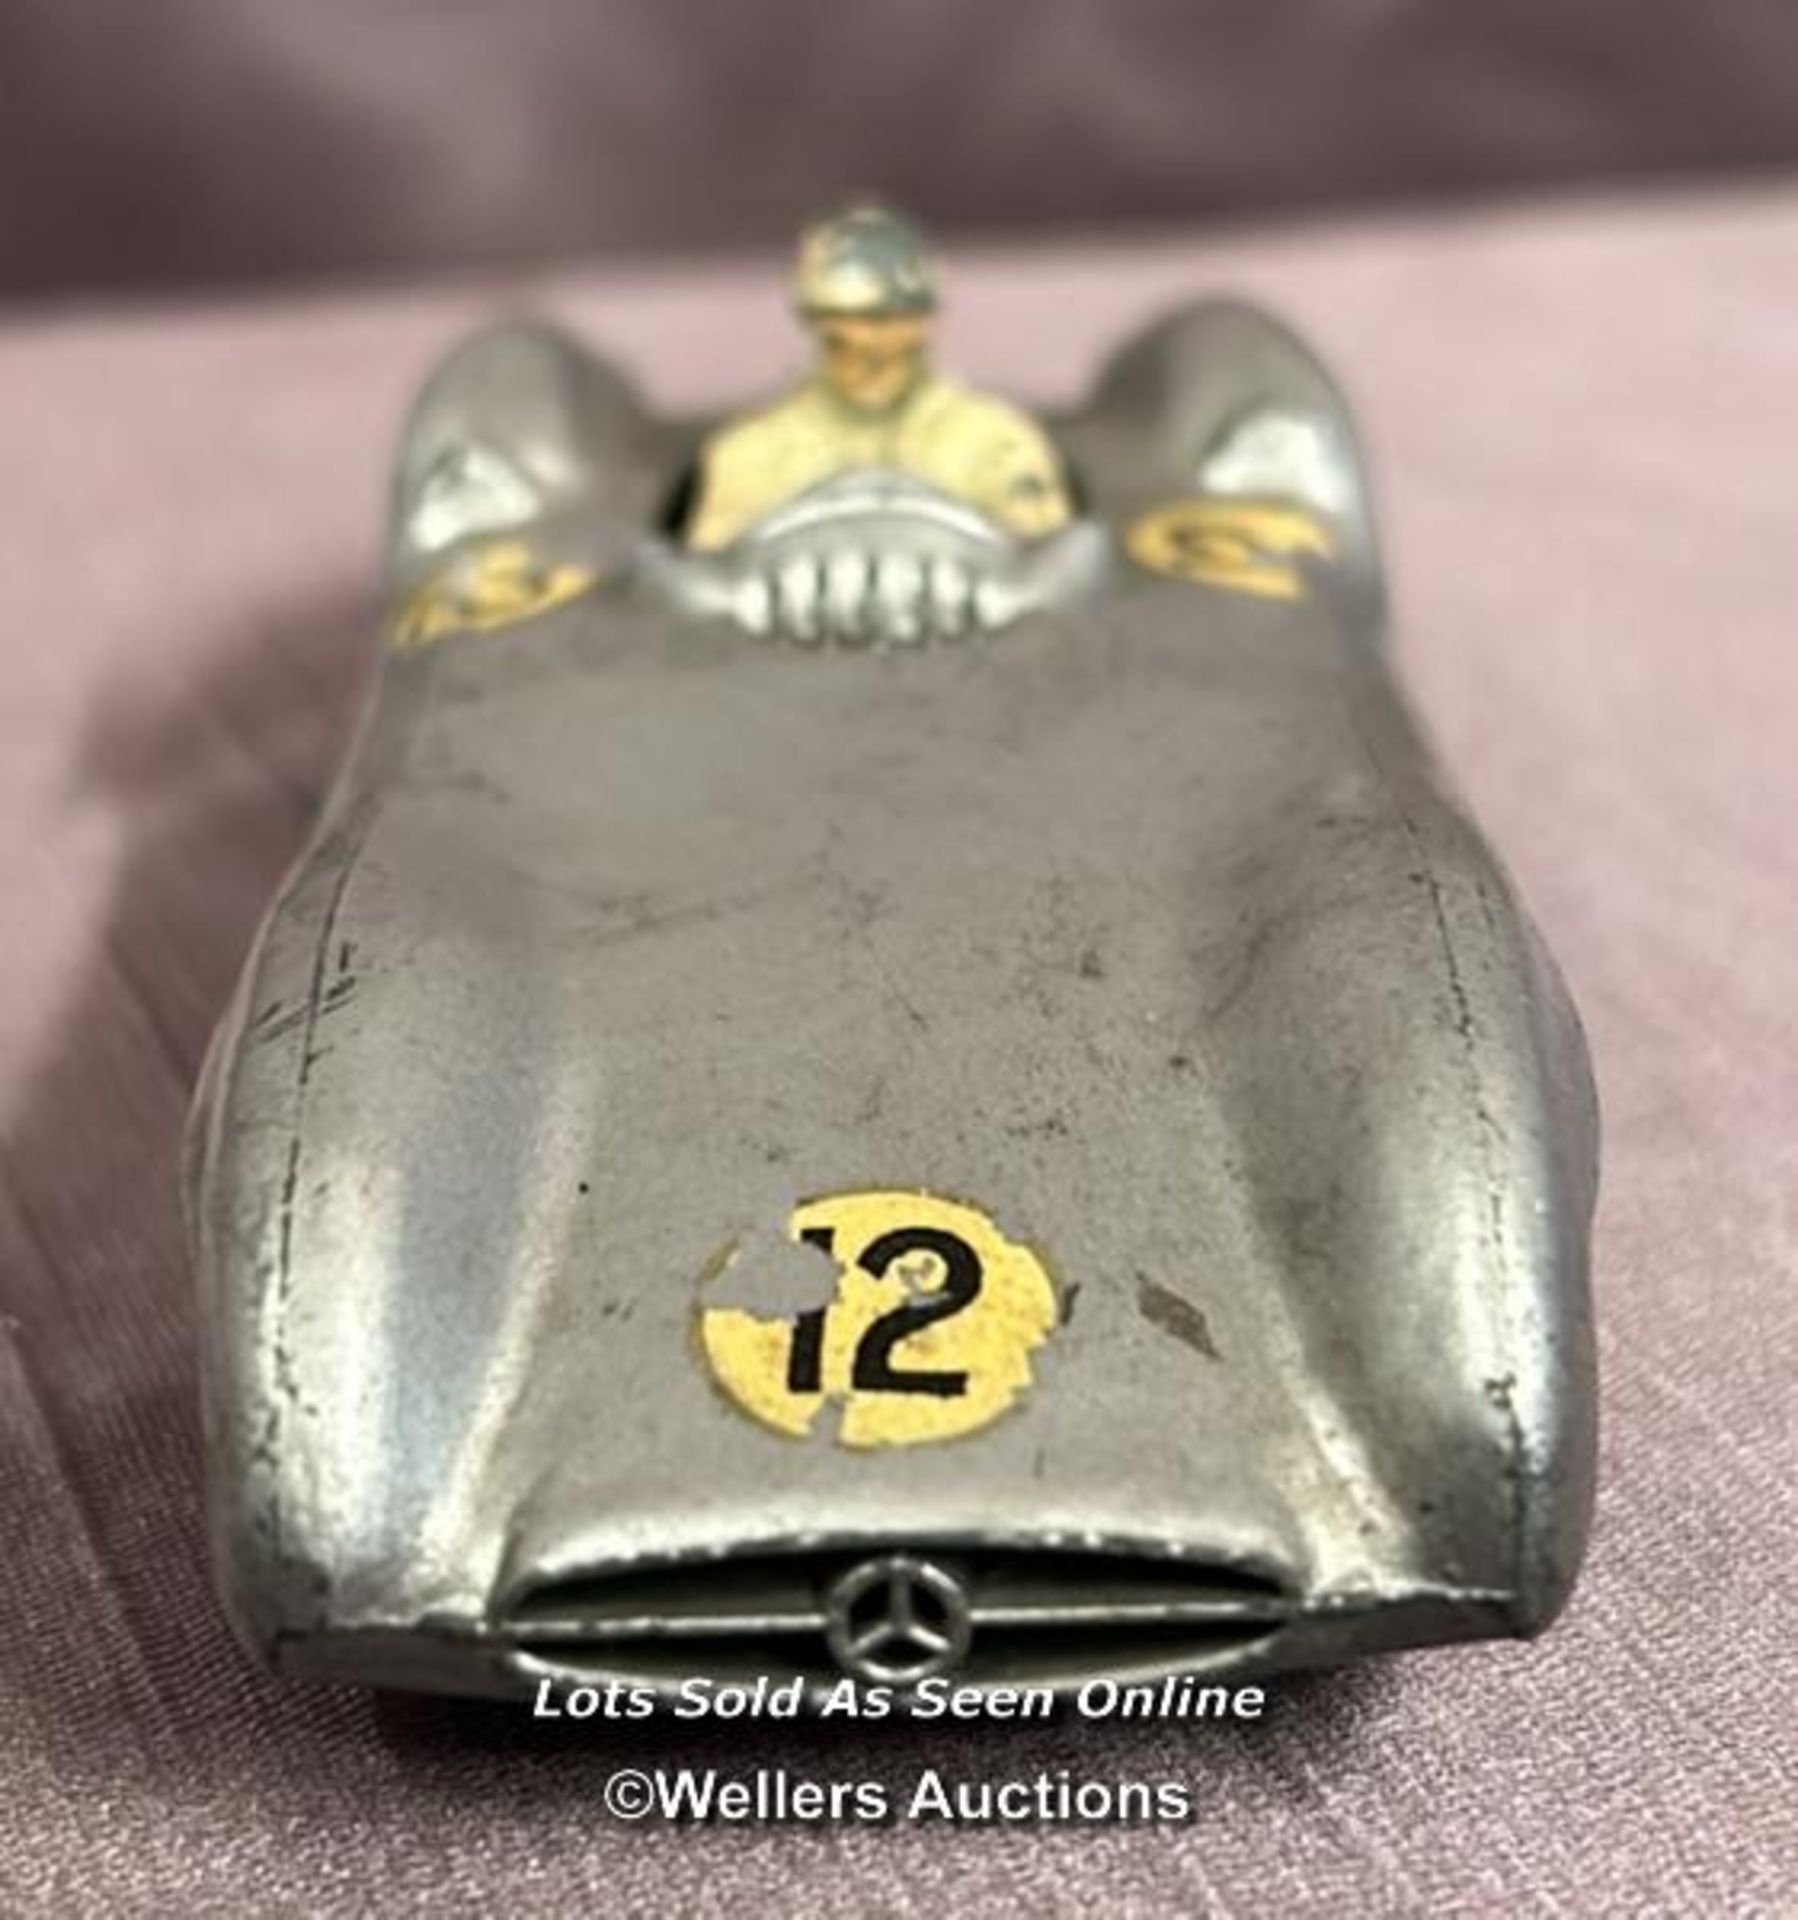 THE CRESCENT TOY COMPANY DIE CAST MERCEDES BENZ 2.5LT GRAND PRIX RACING CAR - Image 4 of 5